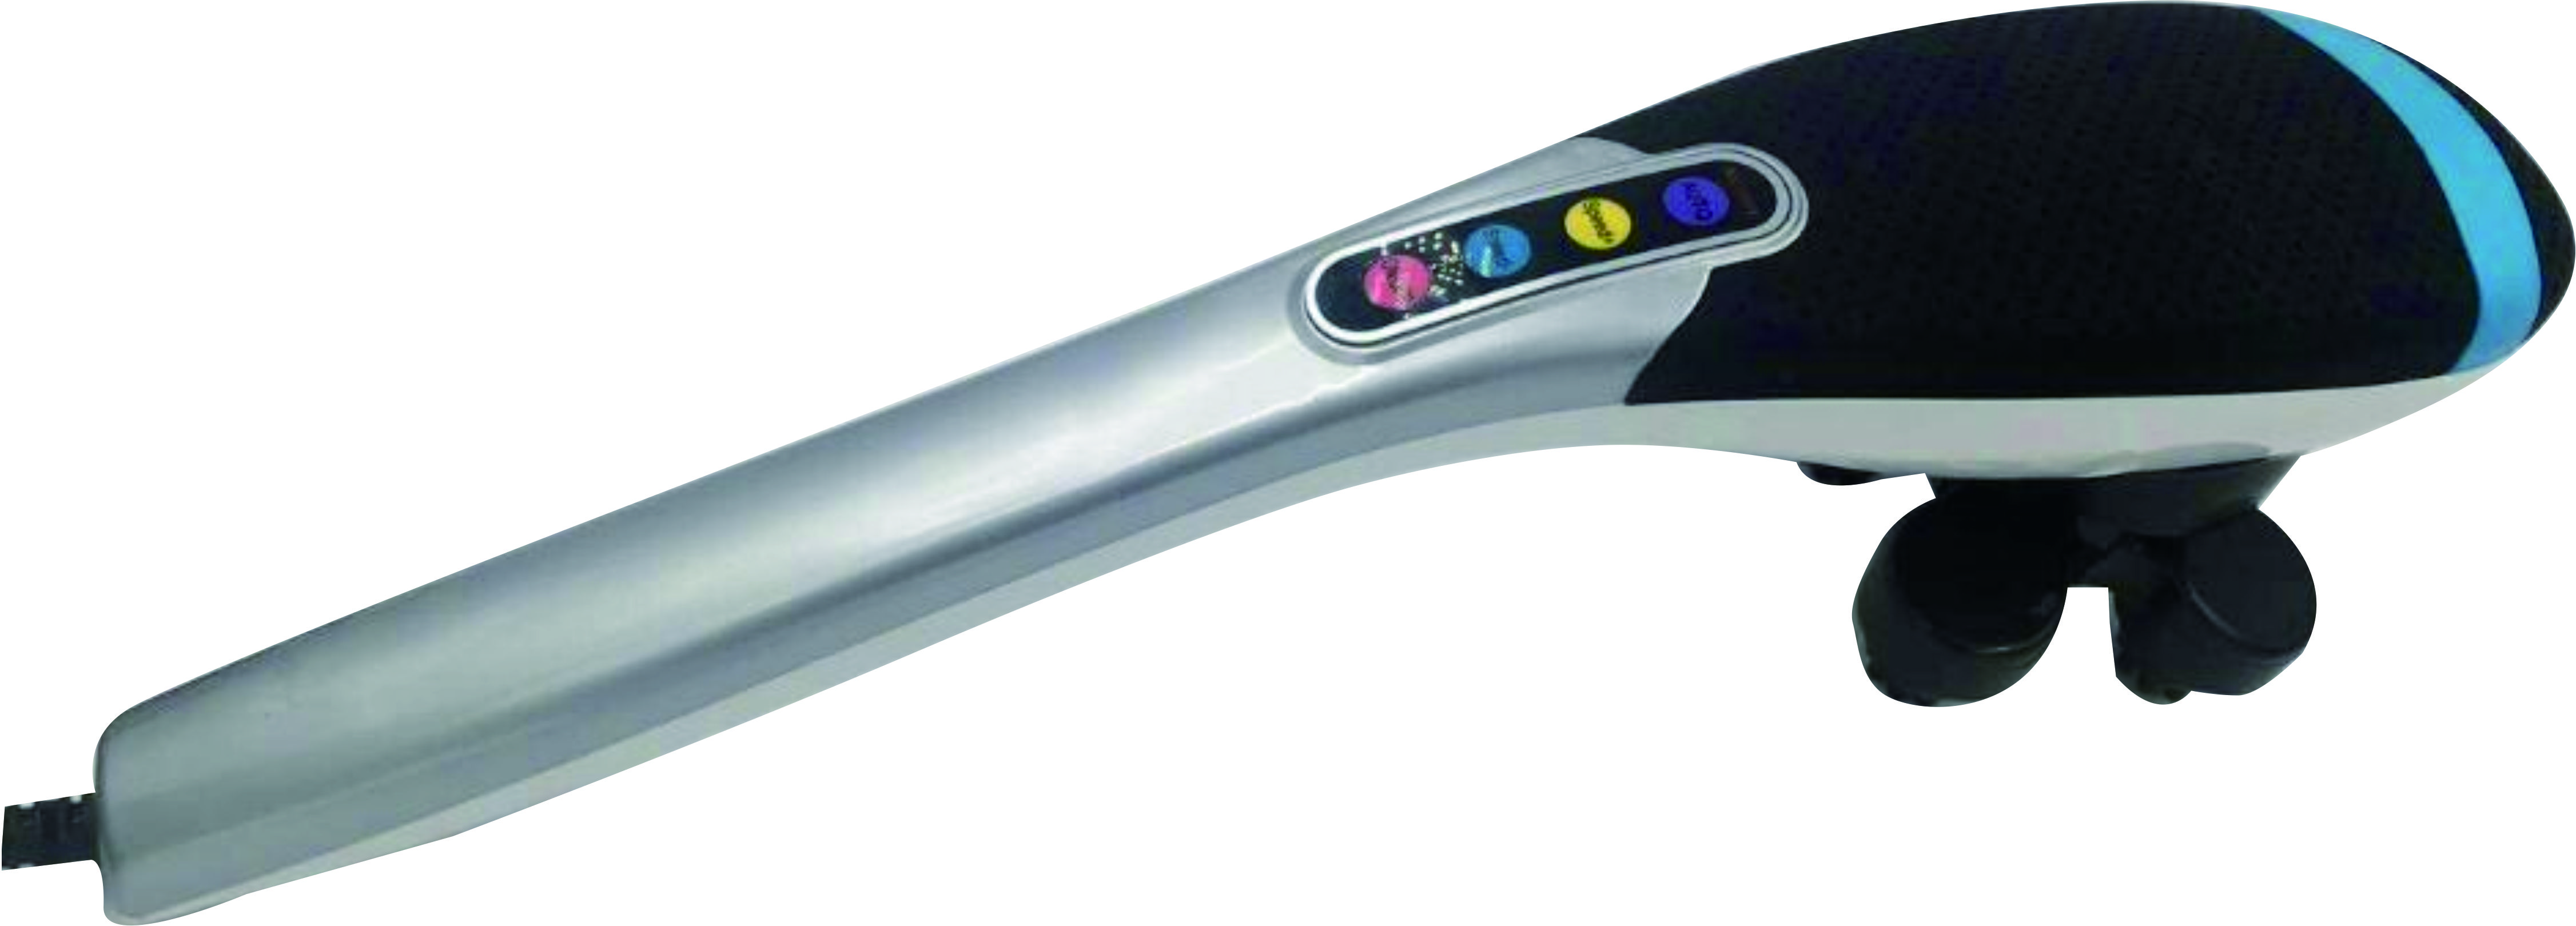 Handheld Massager With Infrared Heat